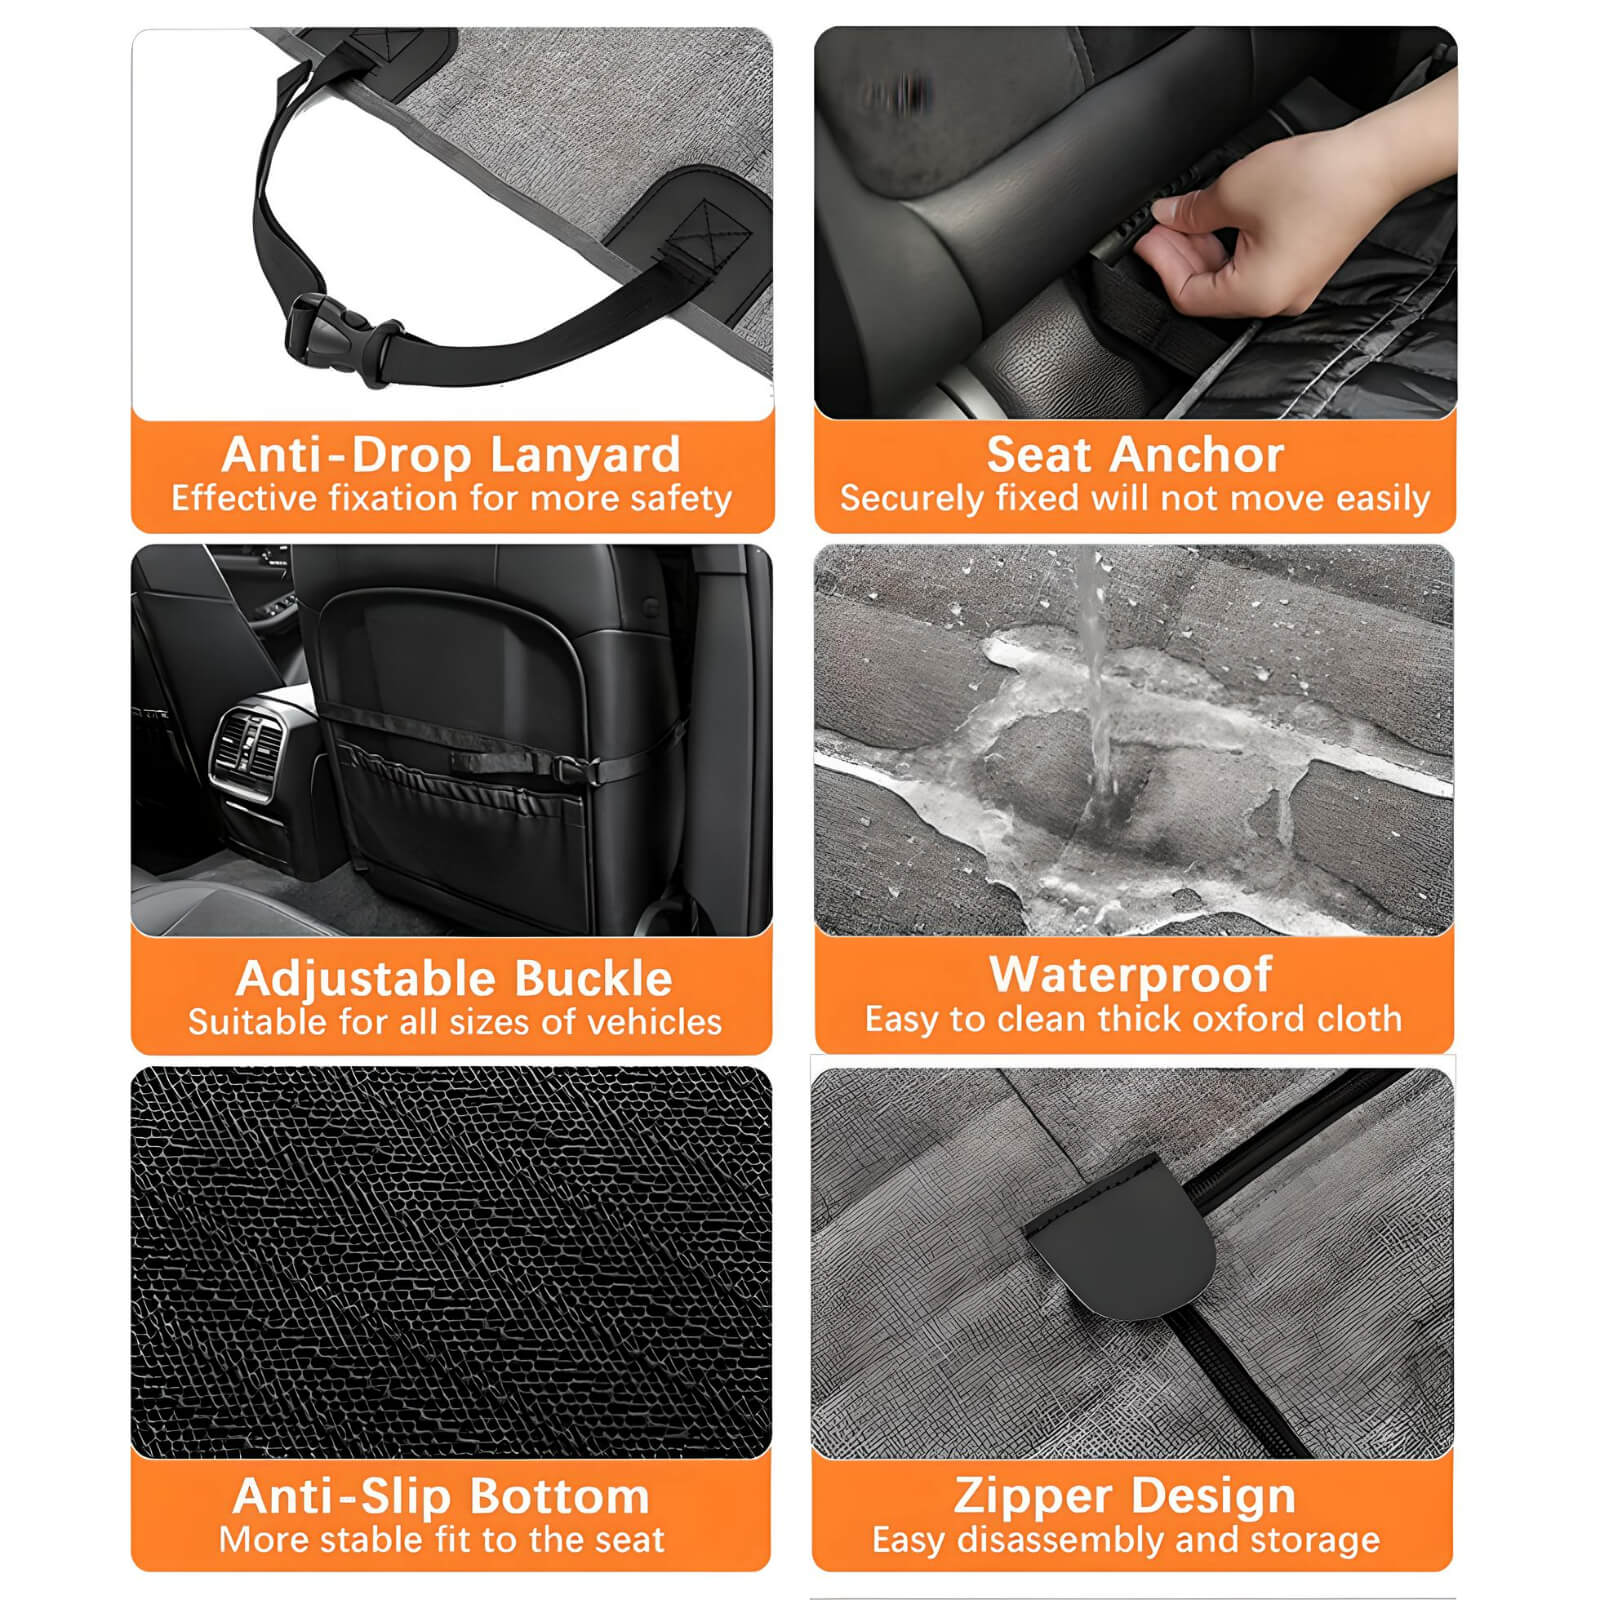 features-of-dog-car-seat-covers